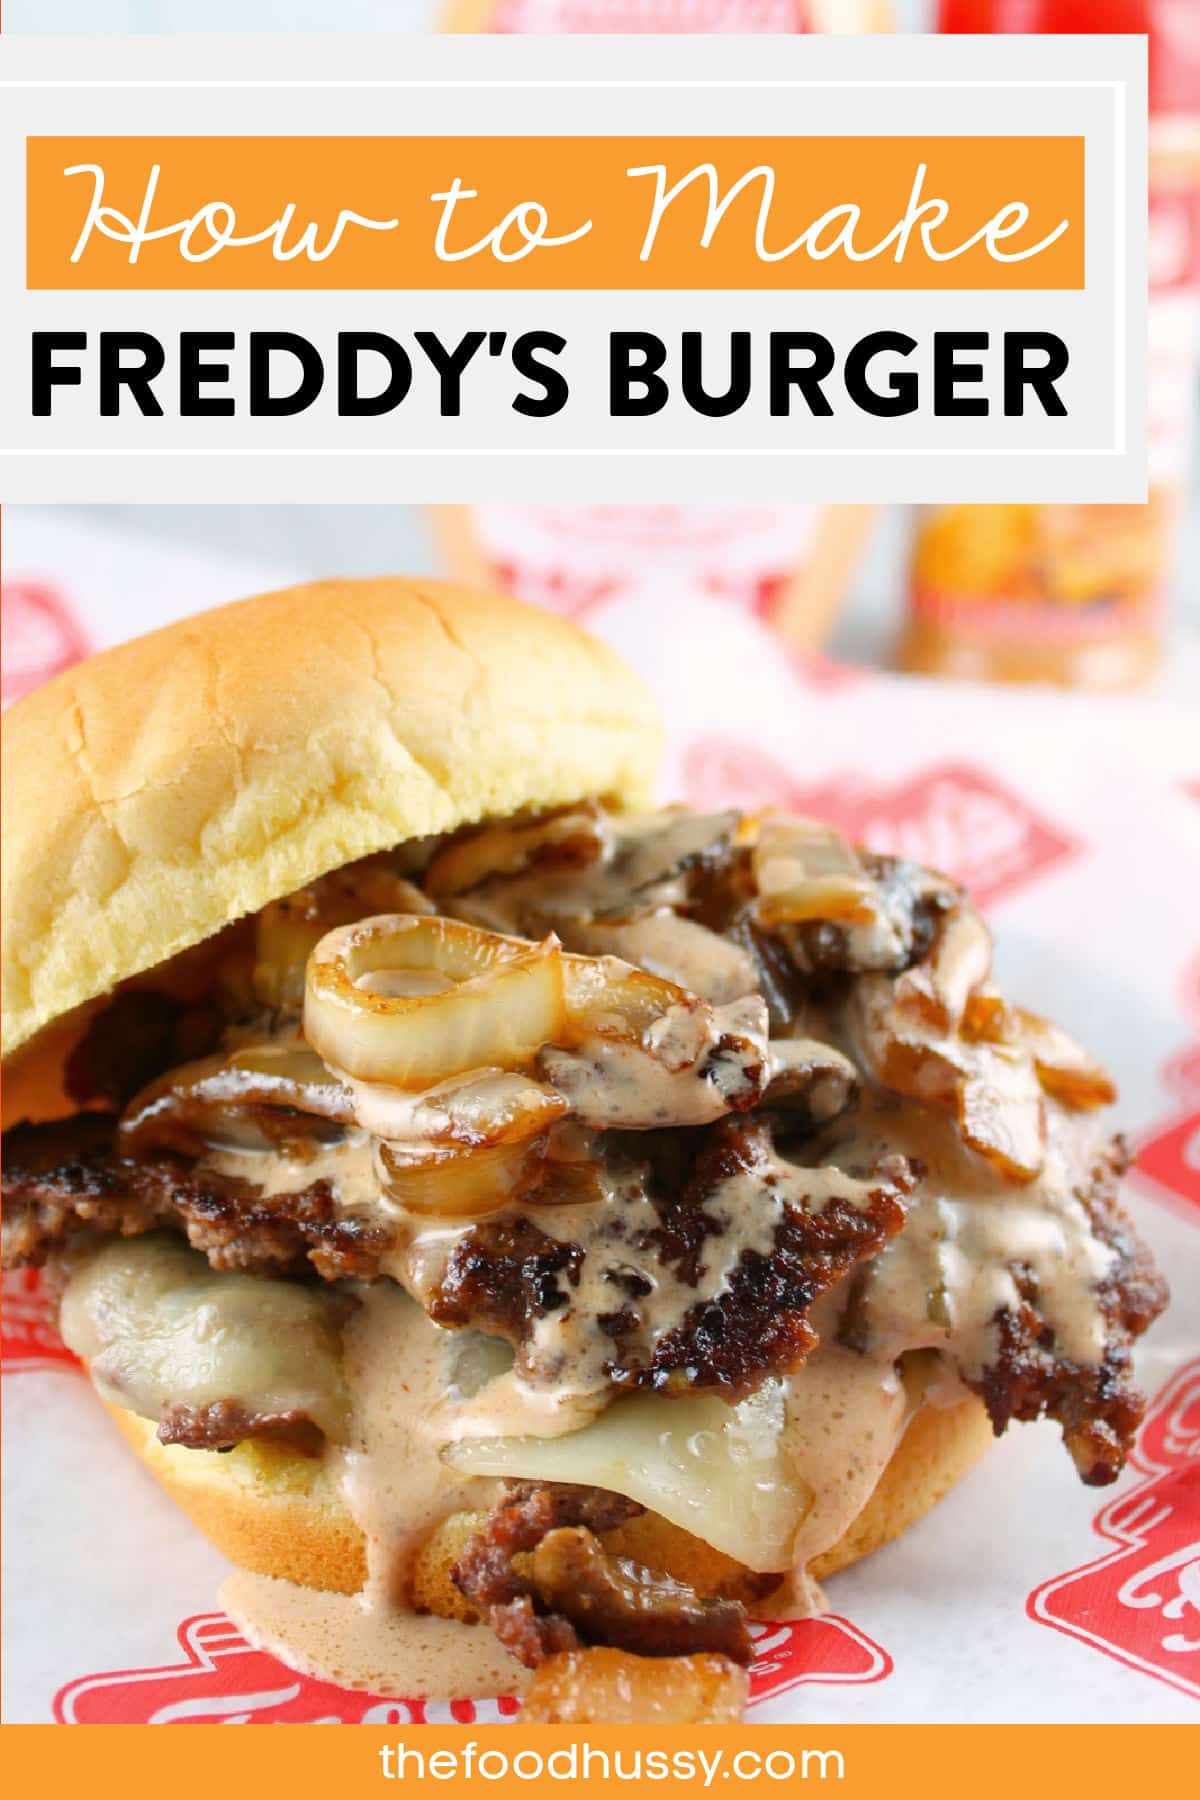 Freddy's Frozen Custard & Steakburgers is our family's favorite fast food burger! This Freddy's Burger Recipe is a delicious way to bring that steakburger taste home and make it for the whole family!
 via @foodhussy